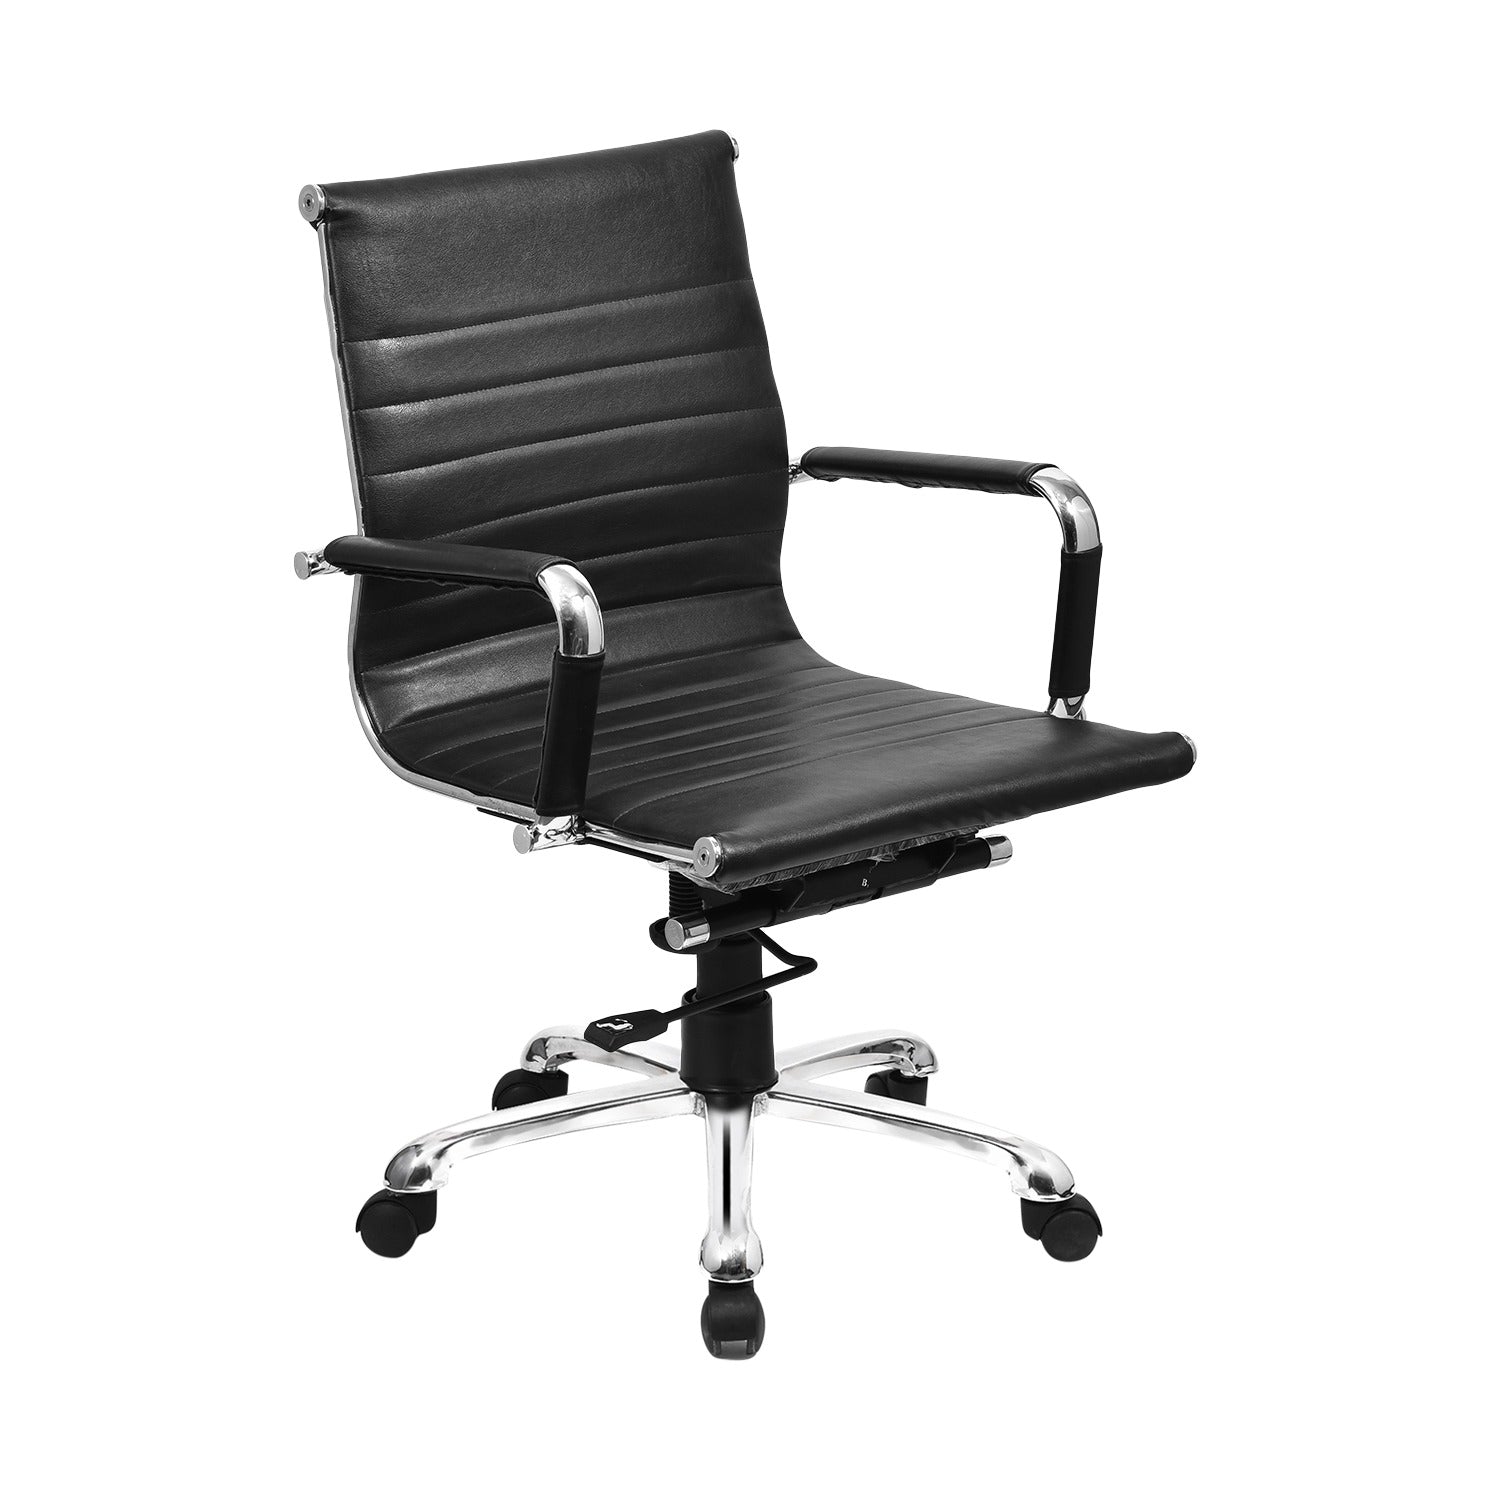 ZSE1033 Medium Back Chair by Zorin in Black Color Zorin